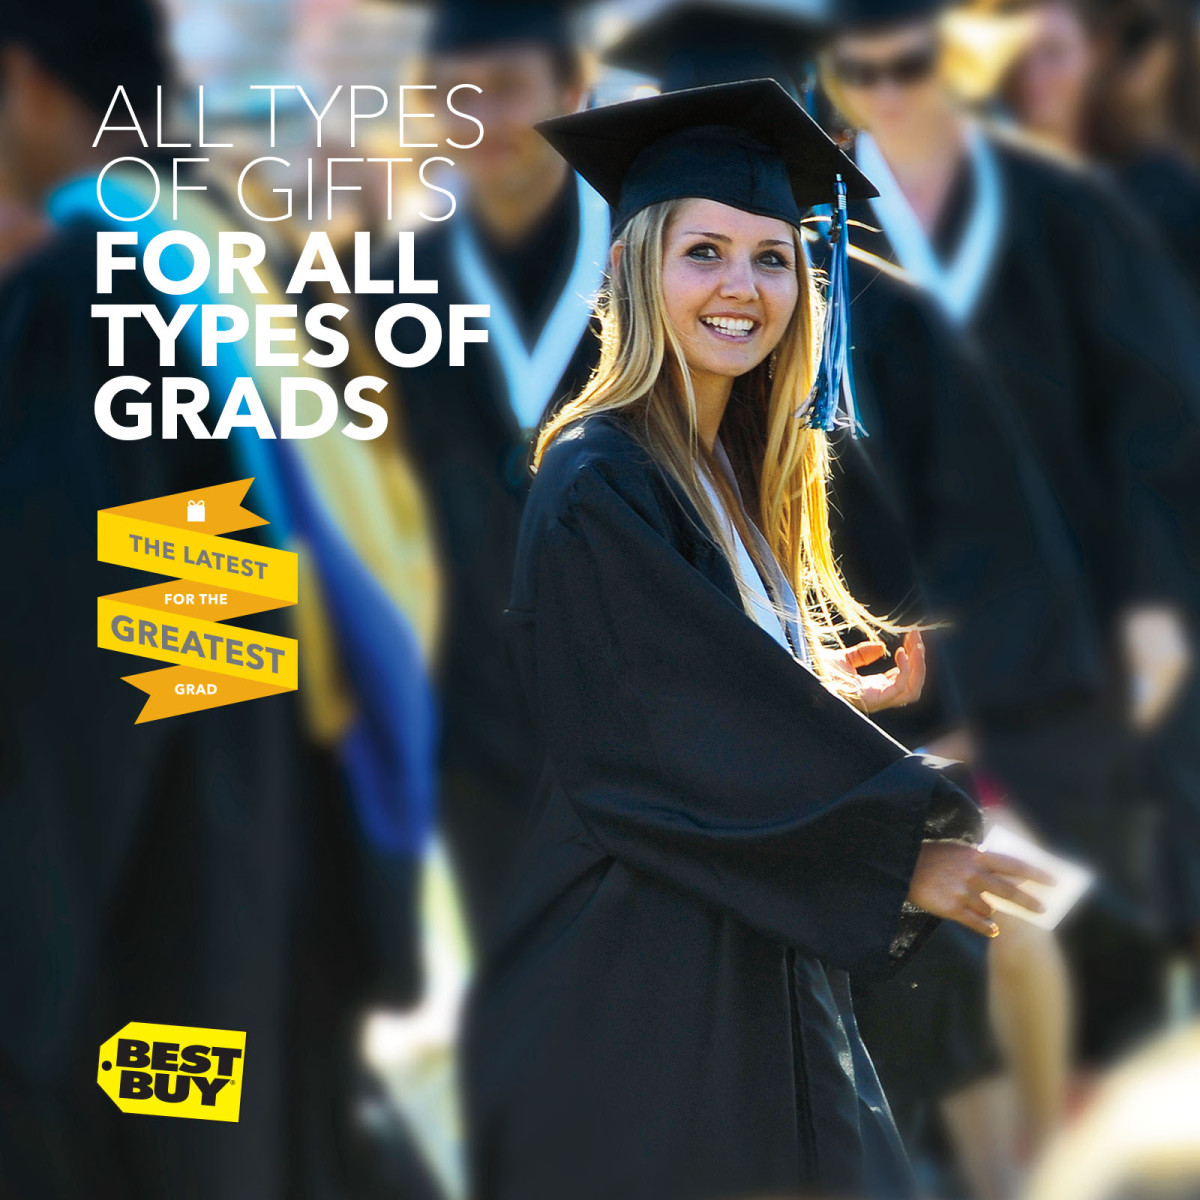 The Greatest Gifts for Grads at Best Buy #GreatestGrad